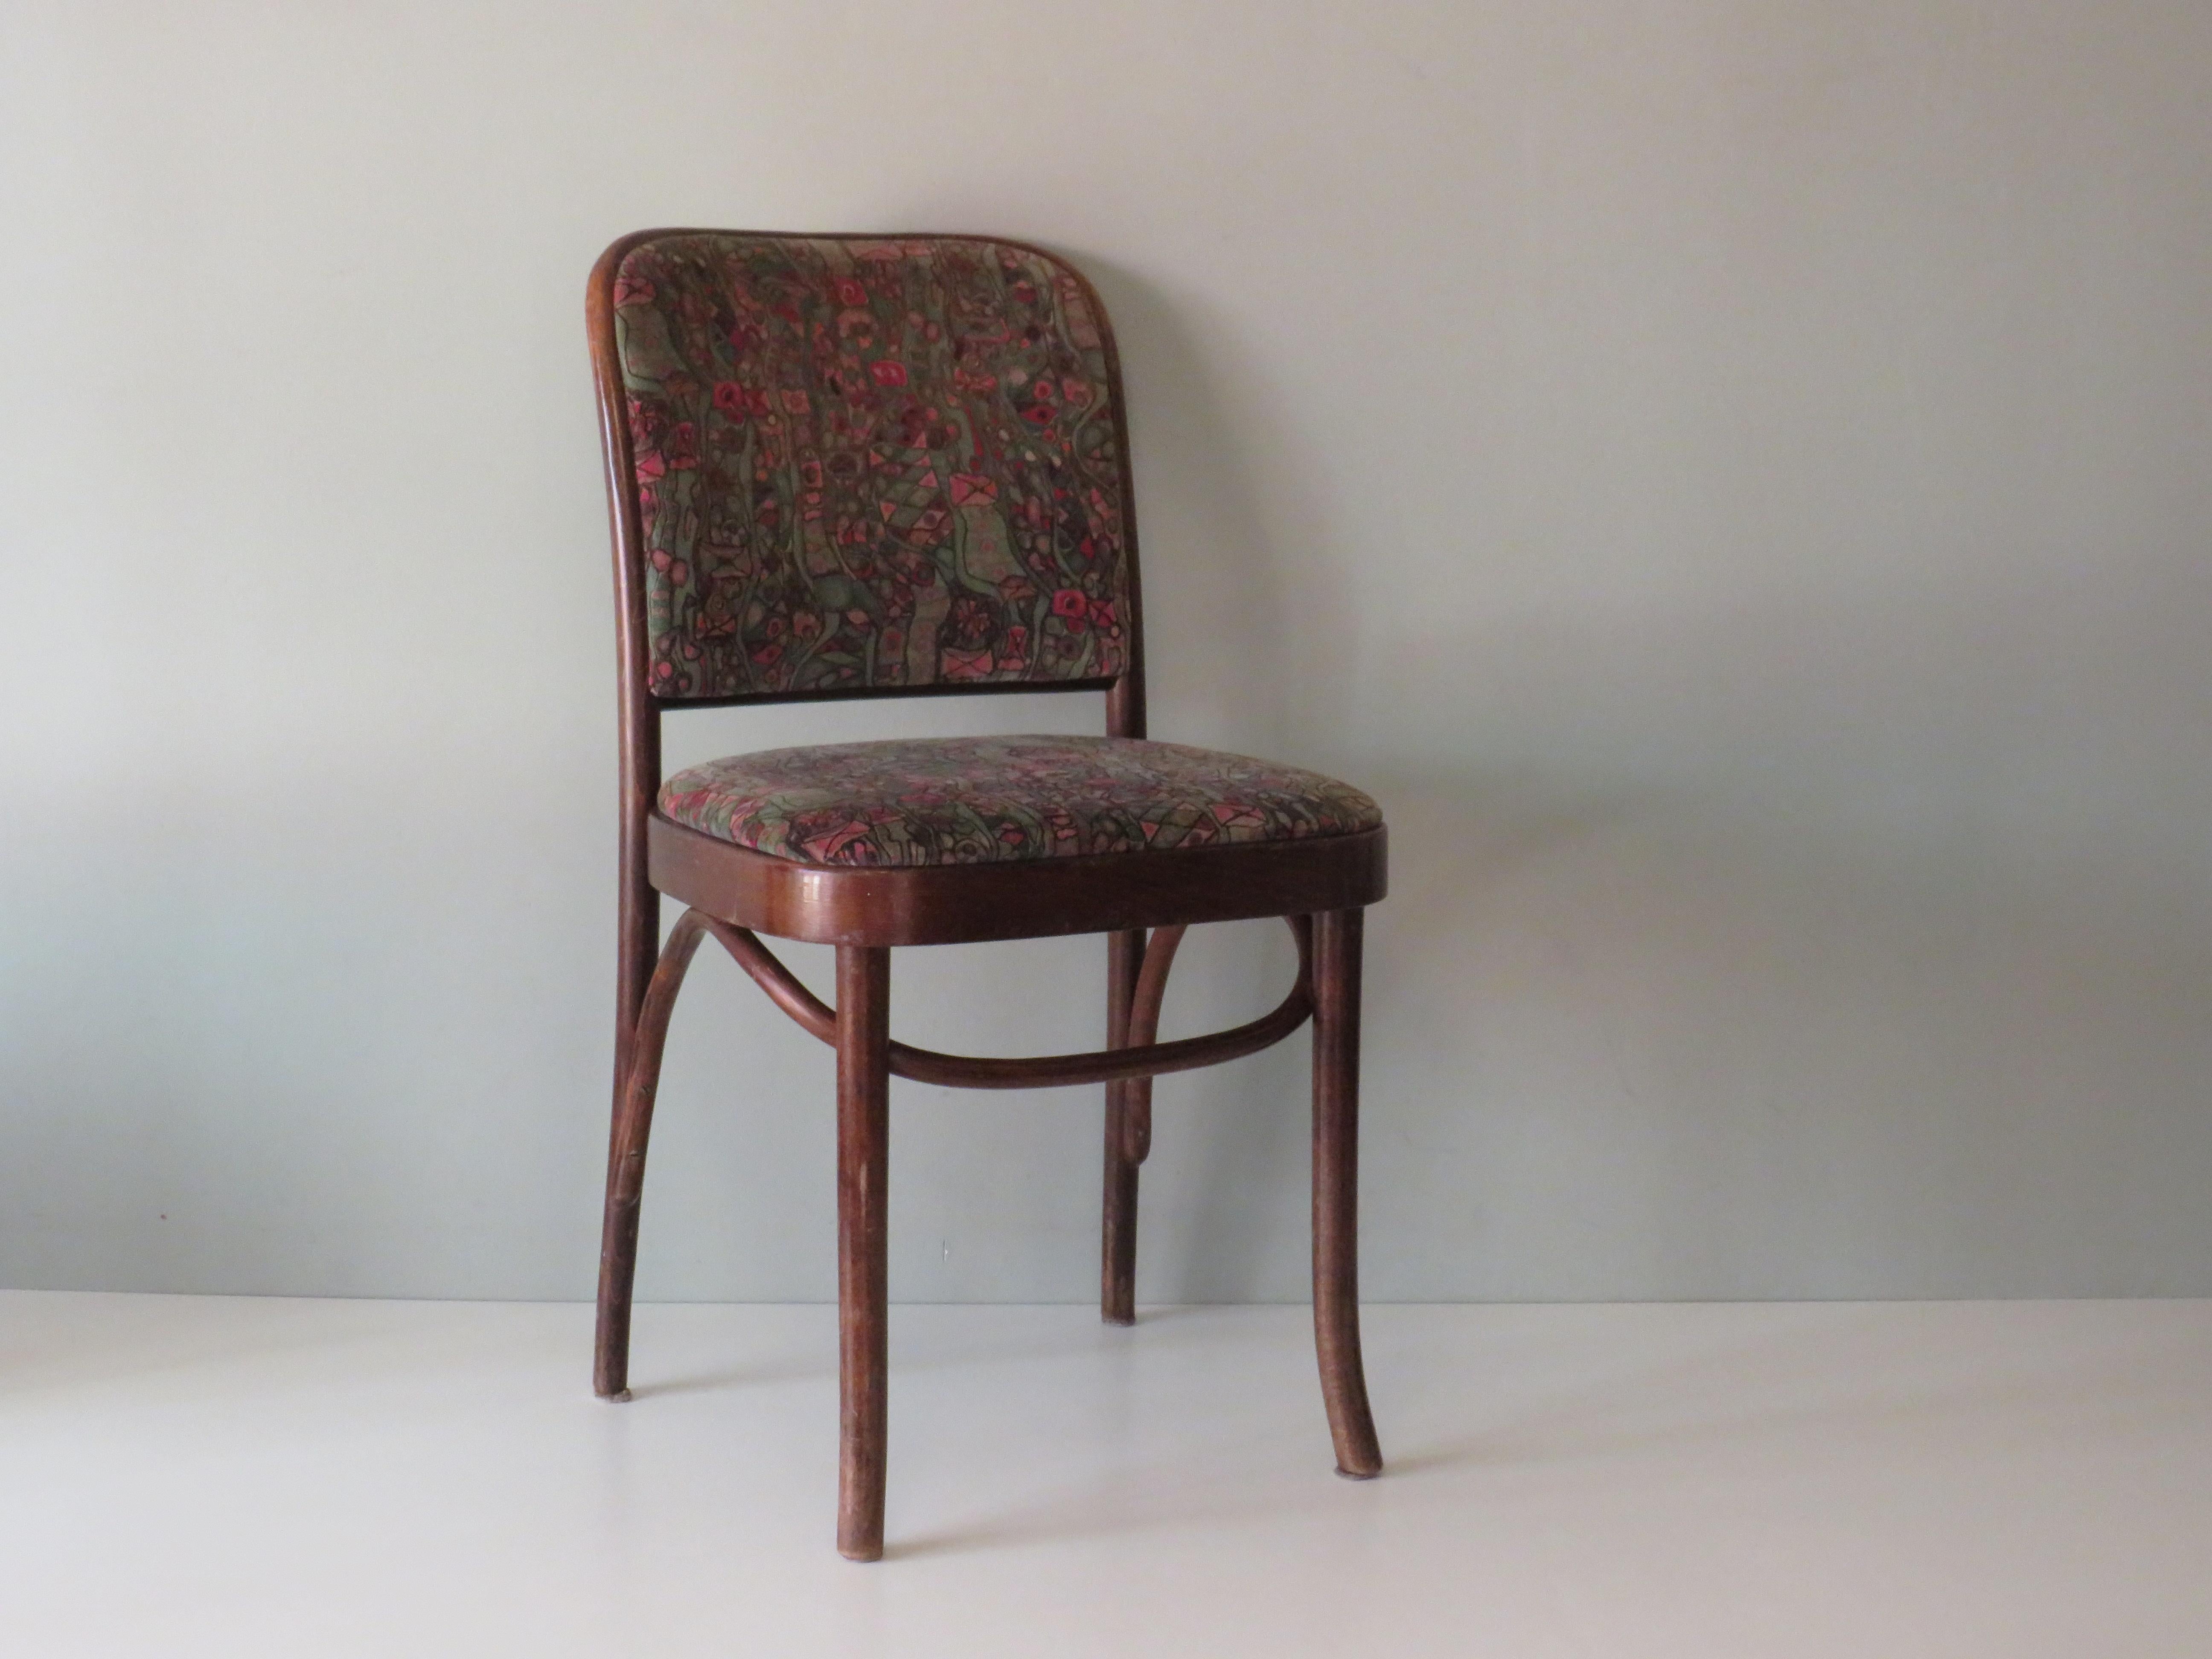 4 Thonet Chairs, Model Prague No. 811, First Half of the 20th Century For Sale 3